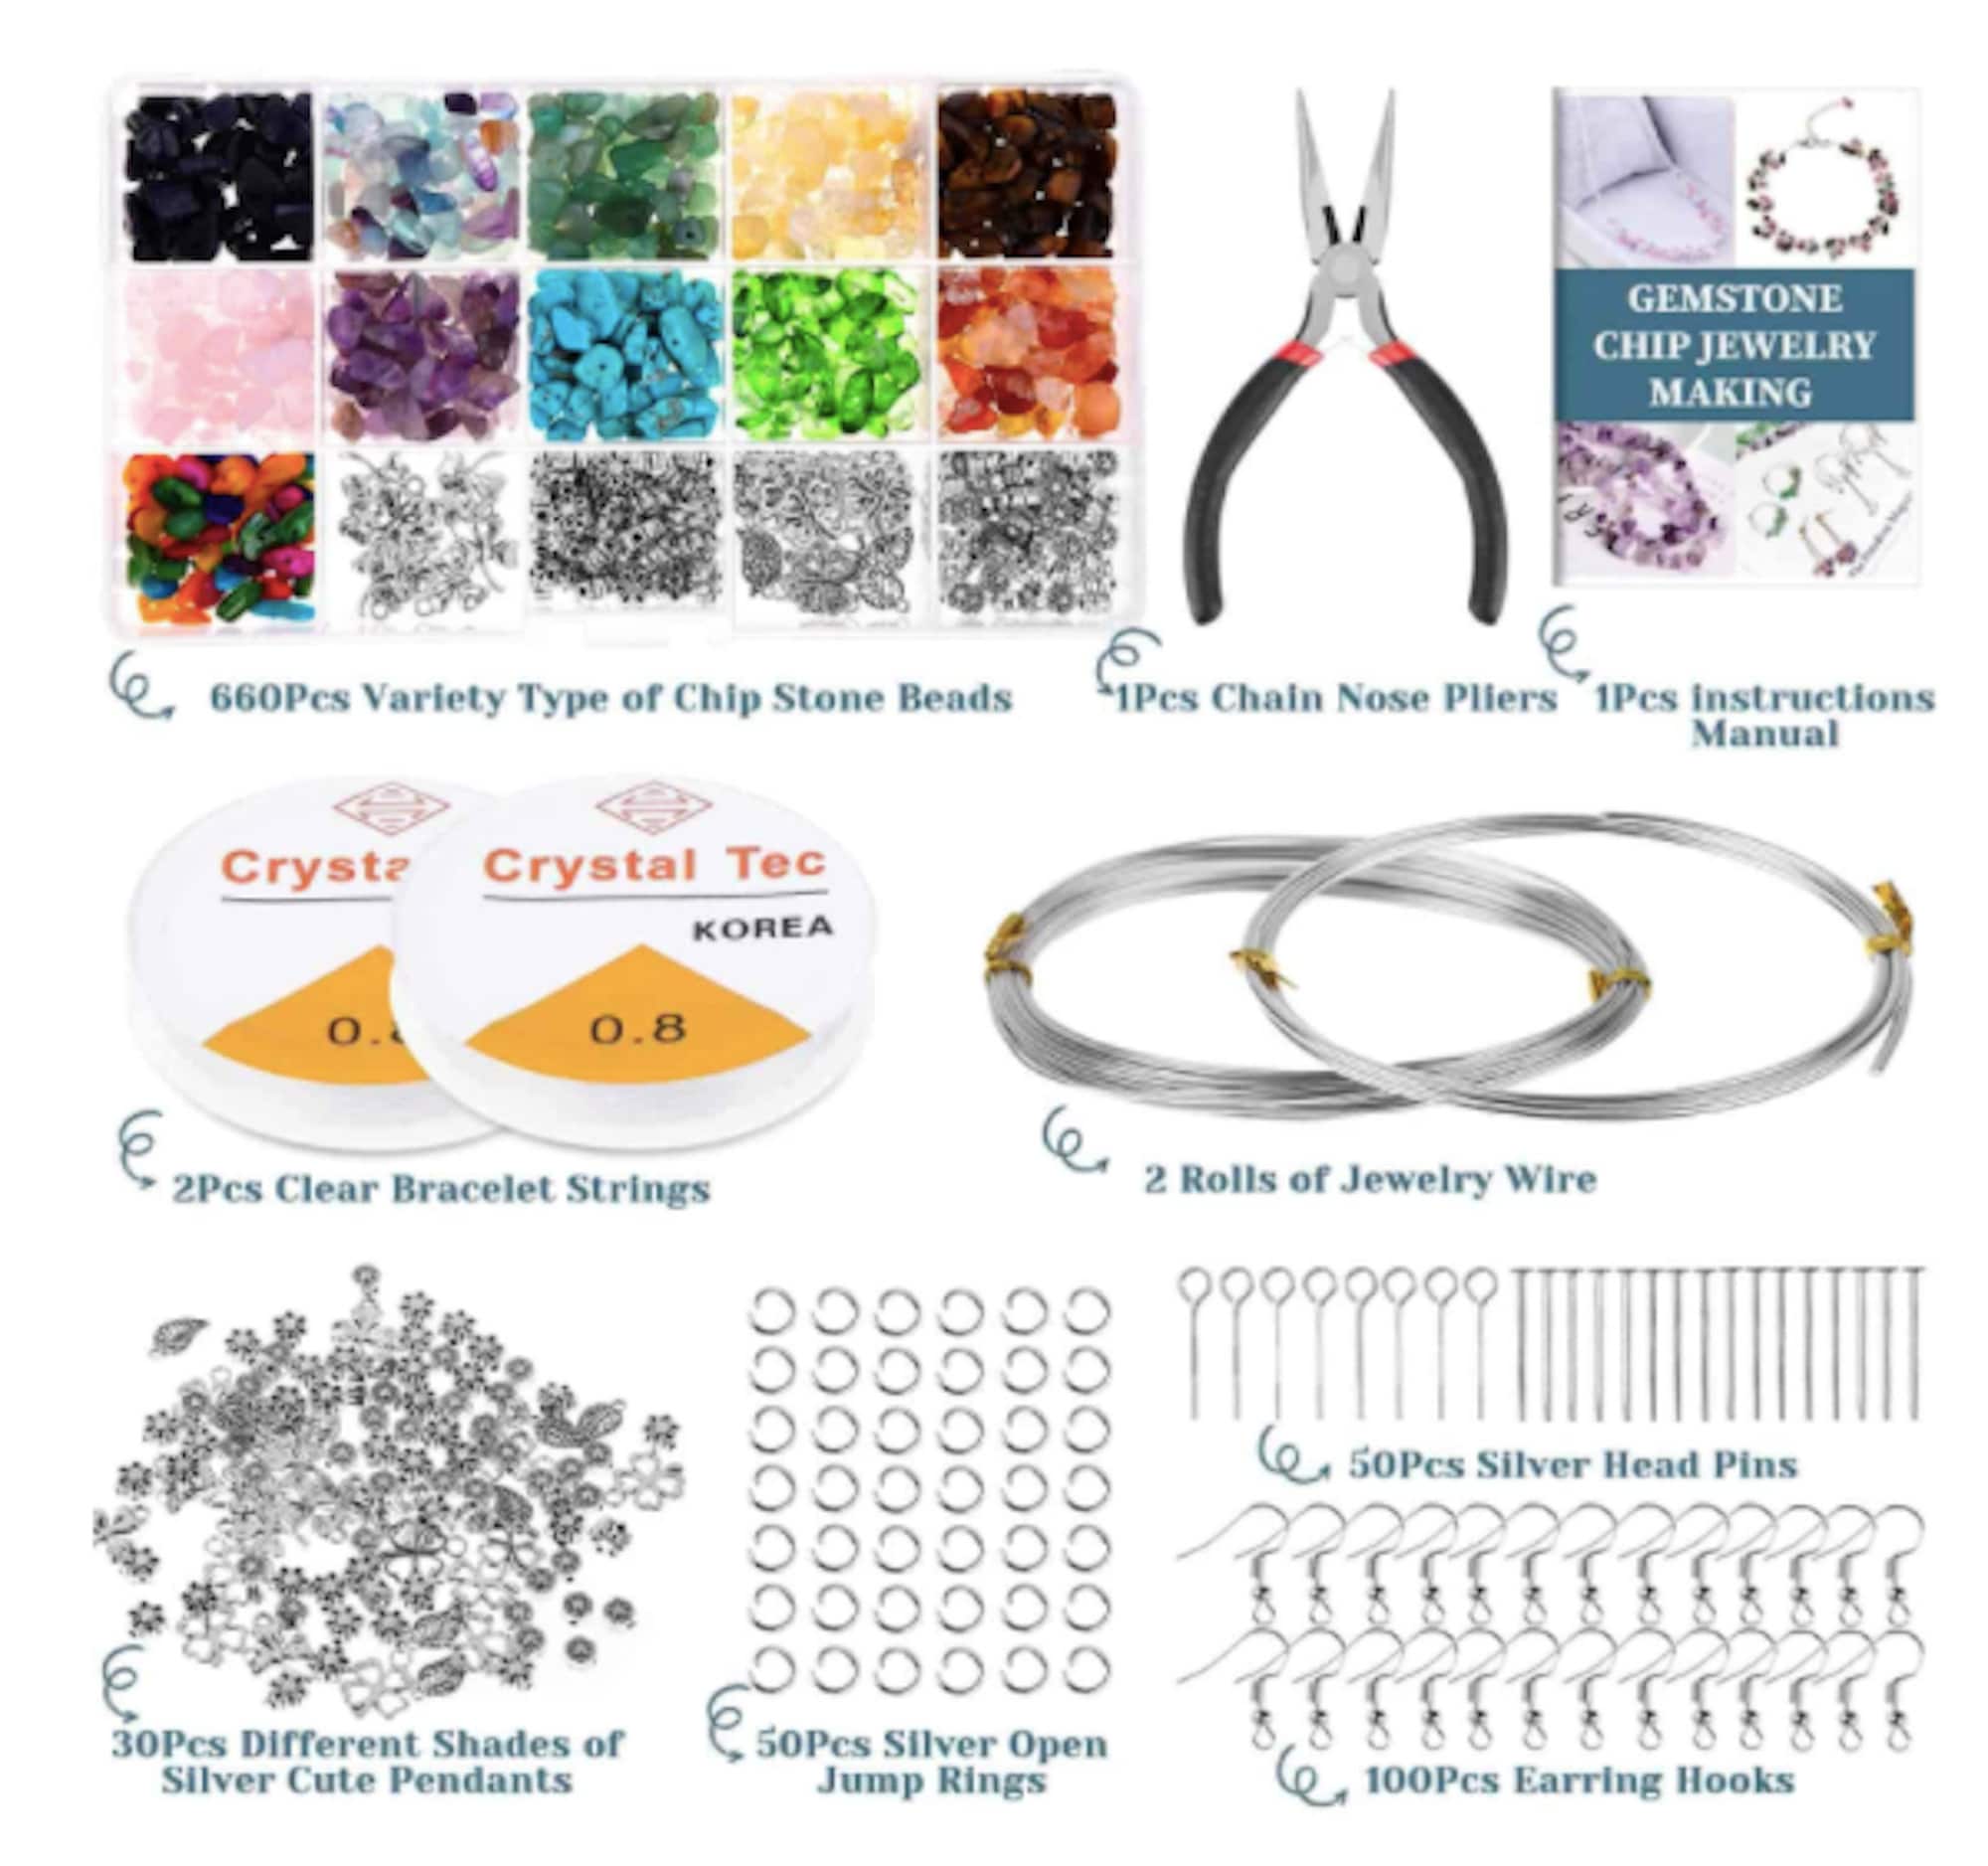 Crystal Jewelry Making Kit With Gemstone Chip Beads, Jewelry Wire, Pliers  and Other Jewelry Ring Making Supplies, 1660pcs by Fablise Craft 